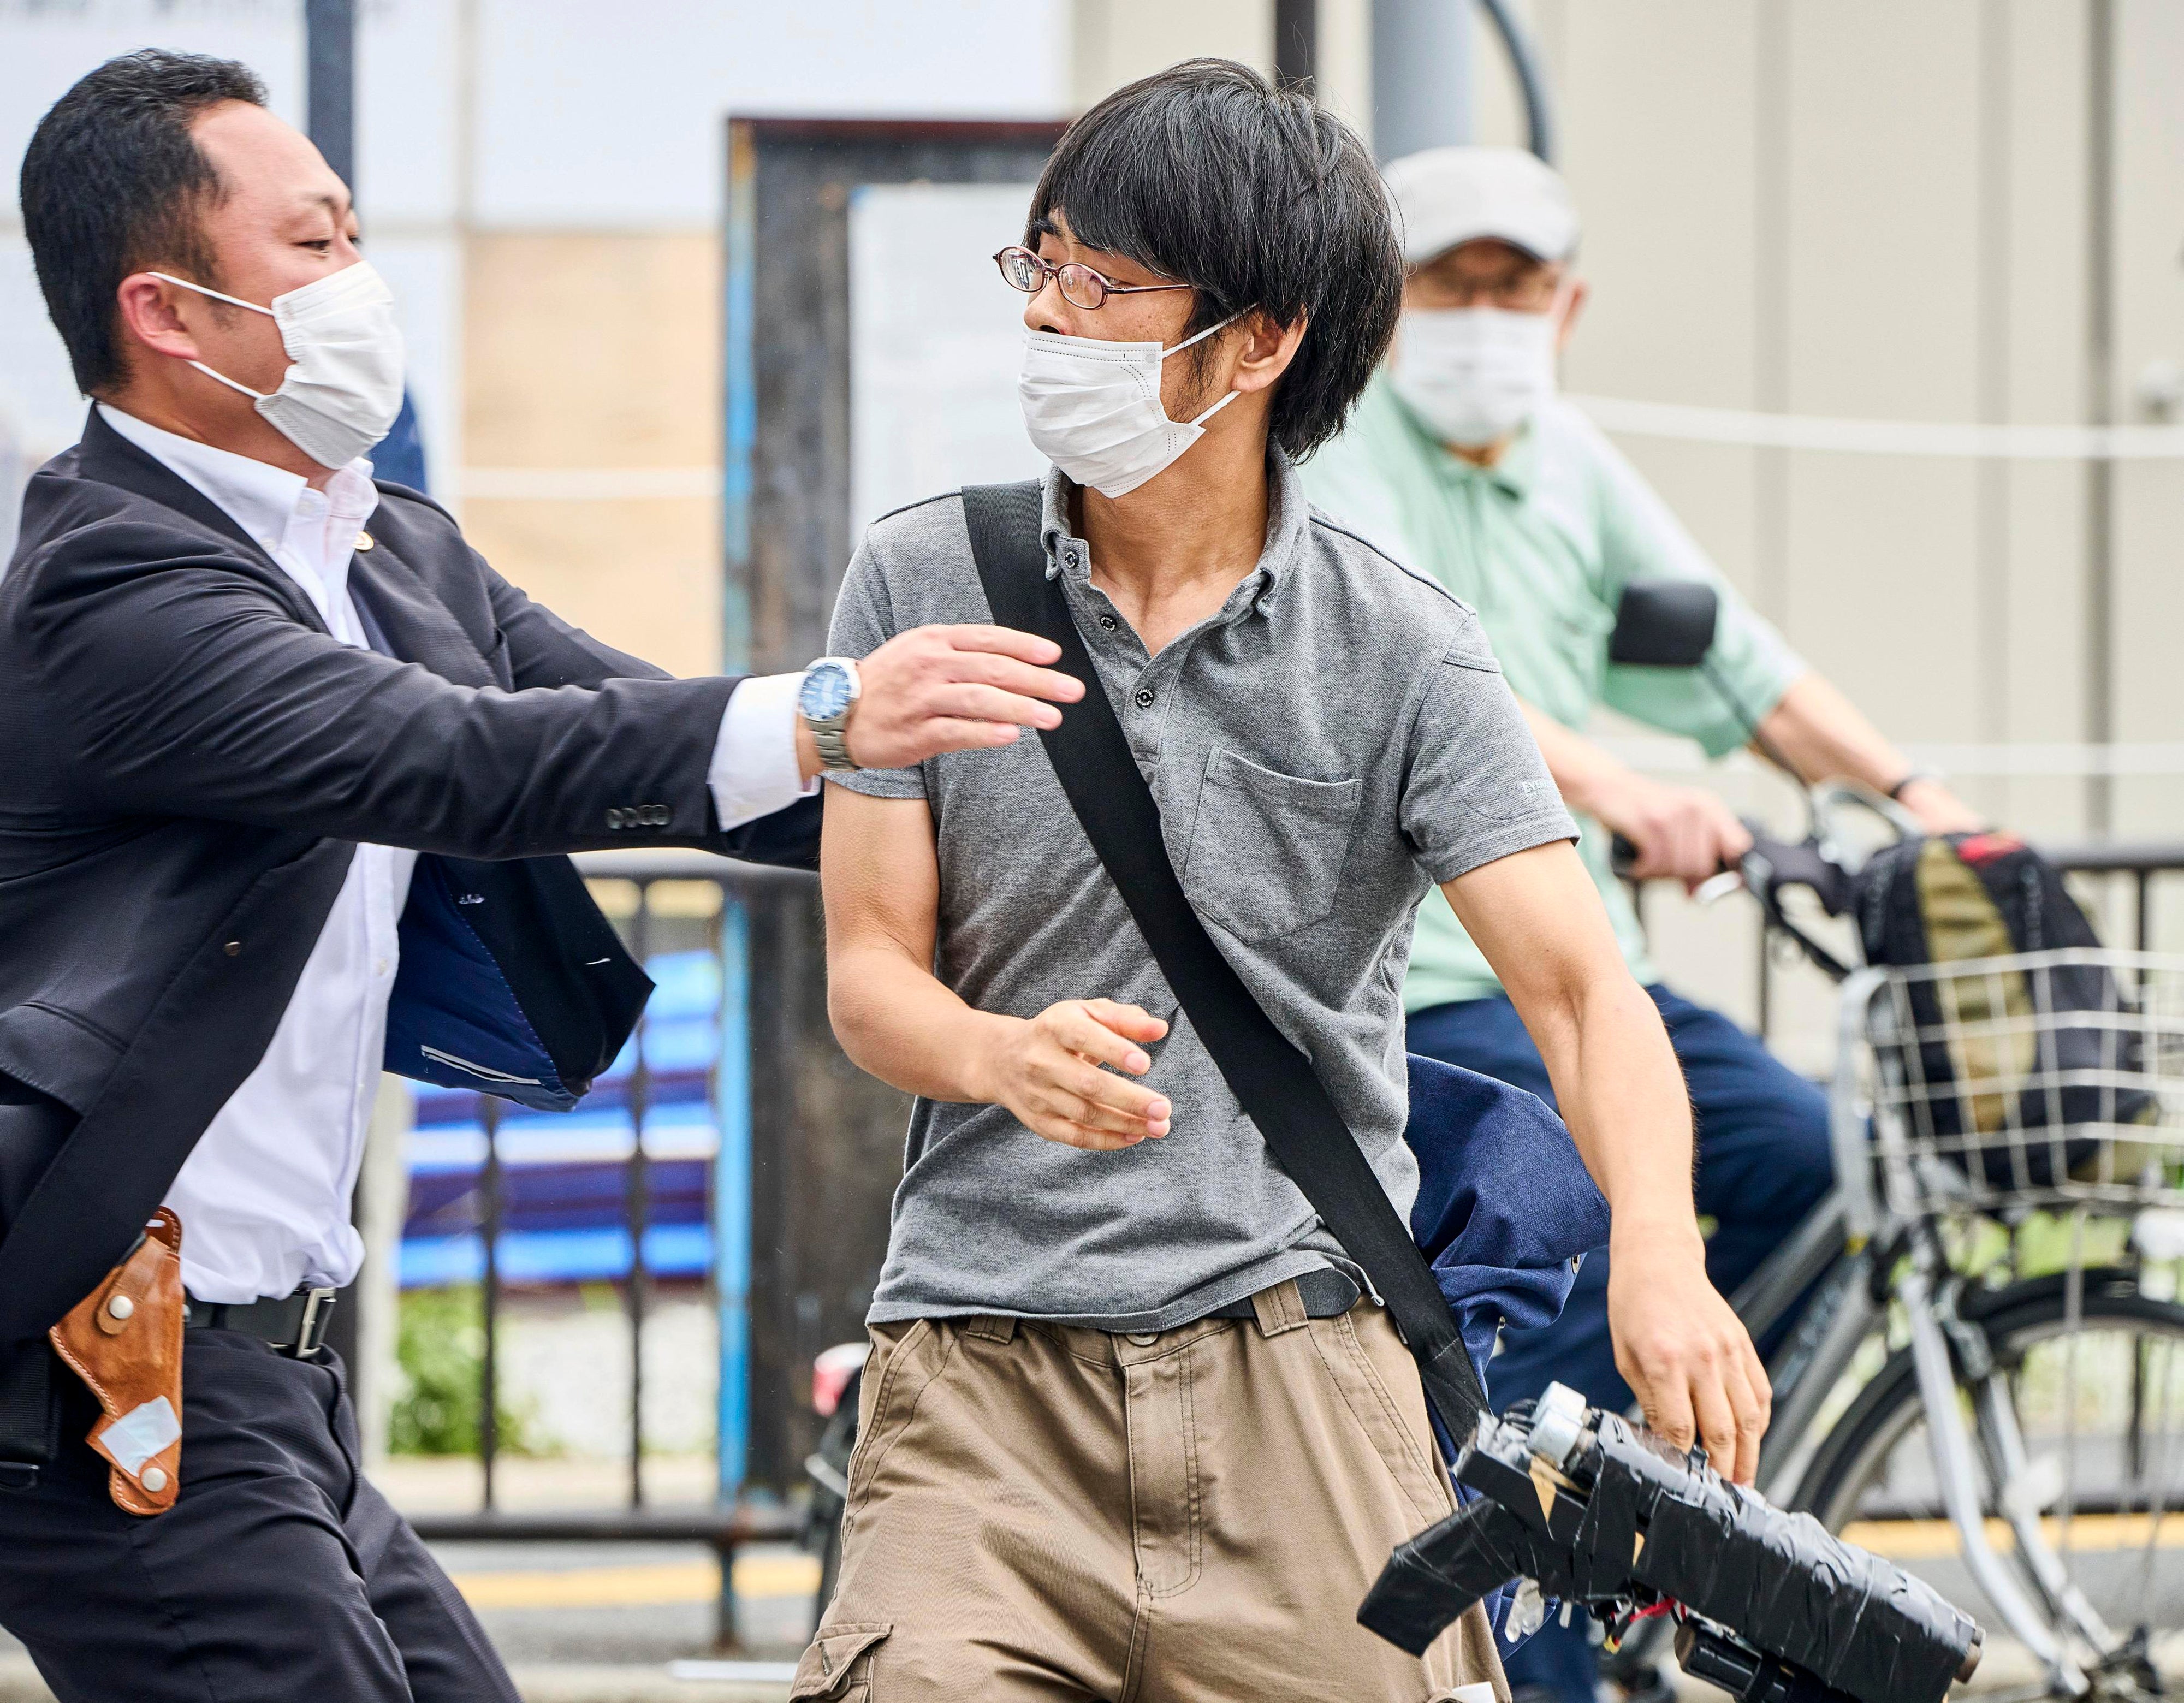 Tetsuya Yamagami, center, holding a weapon, is detained where Shinzo Abe was shot, western Japan on 8 July 2022